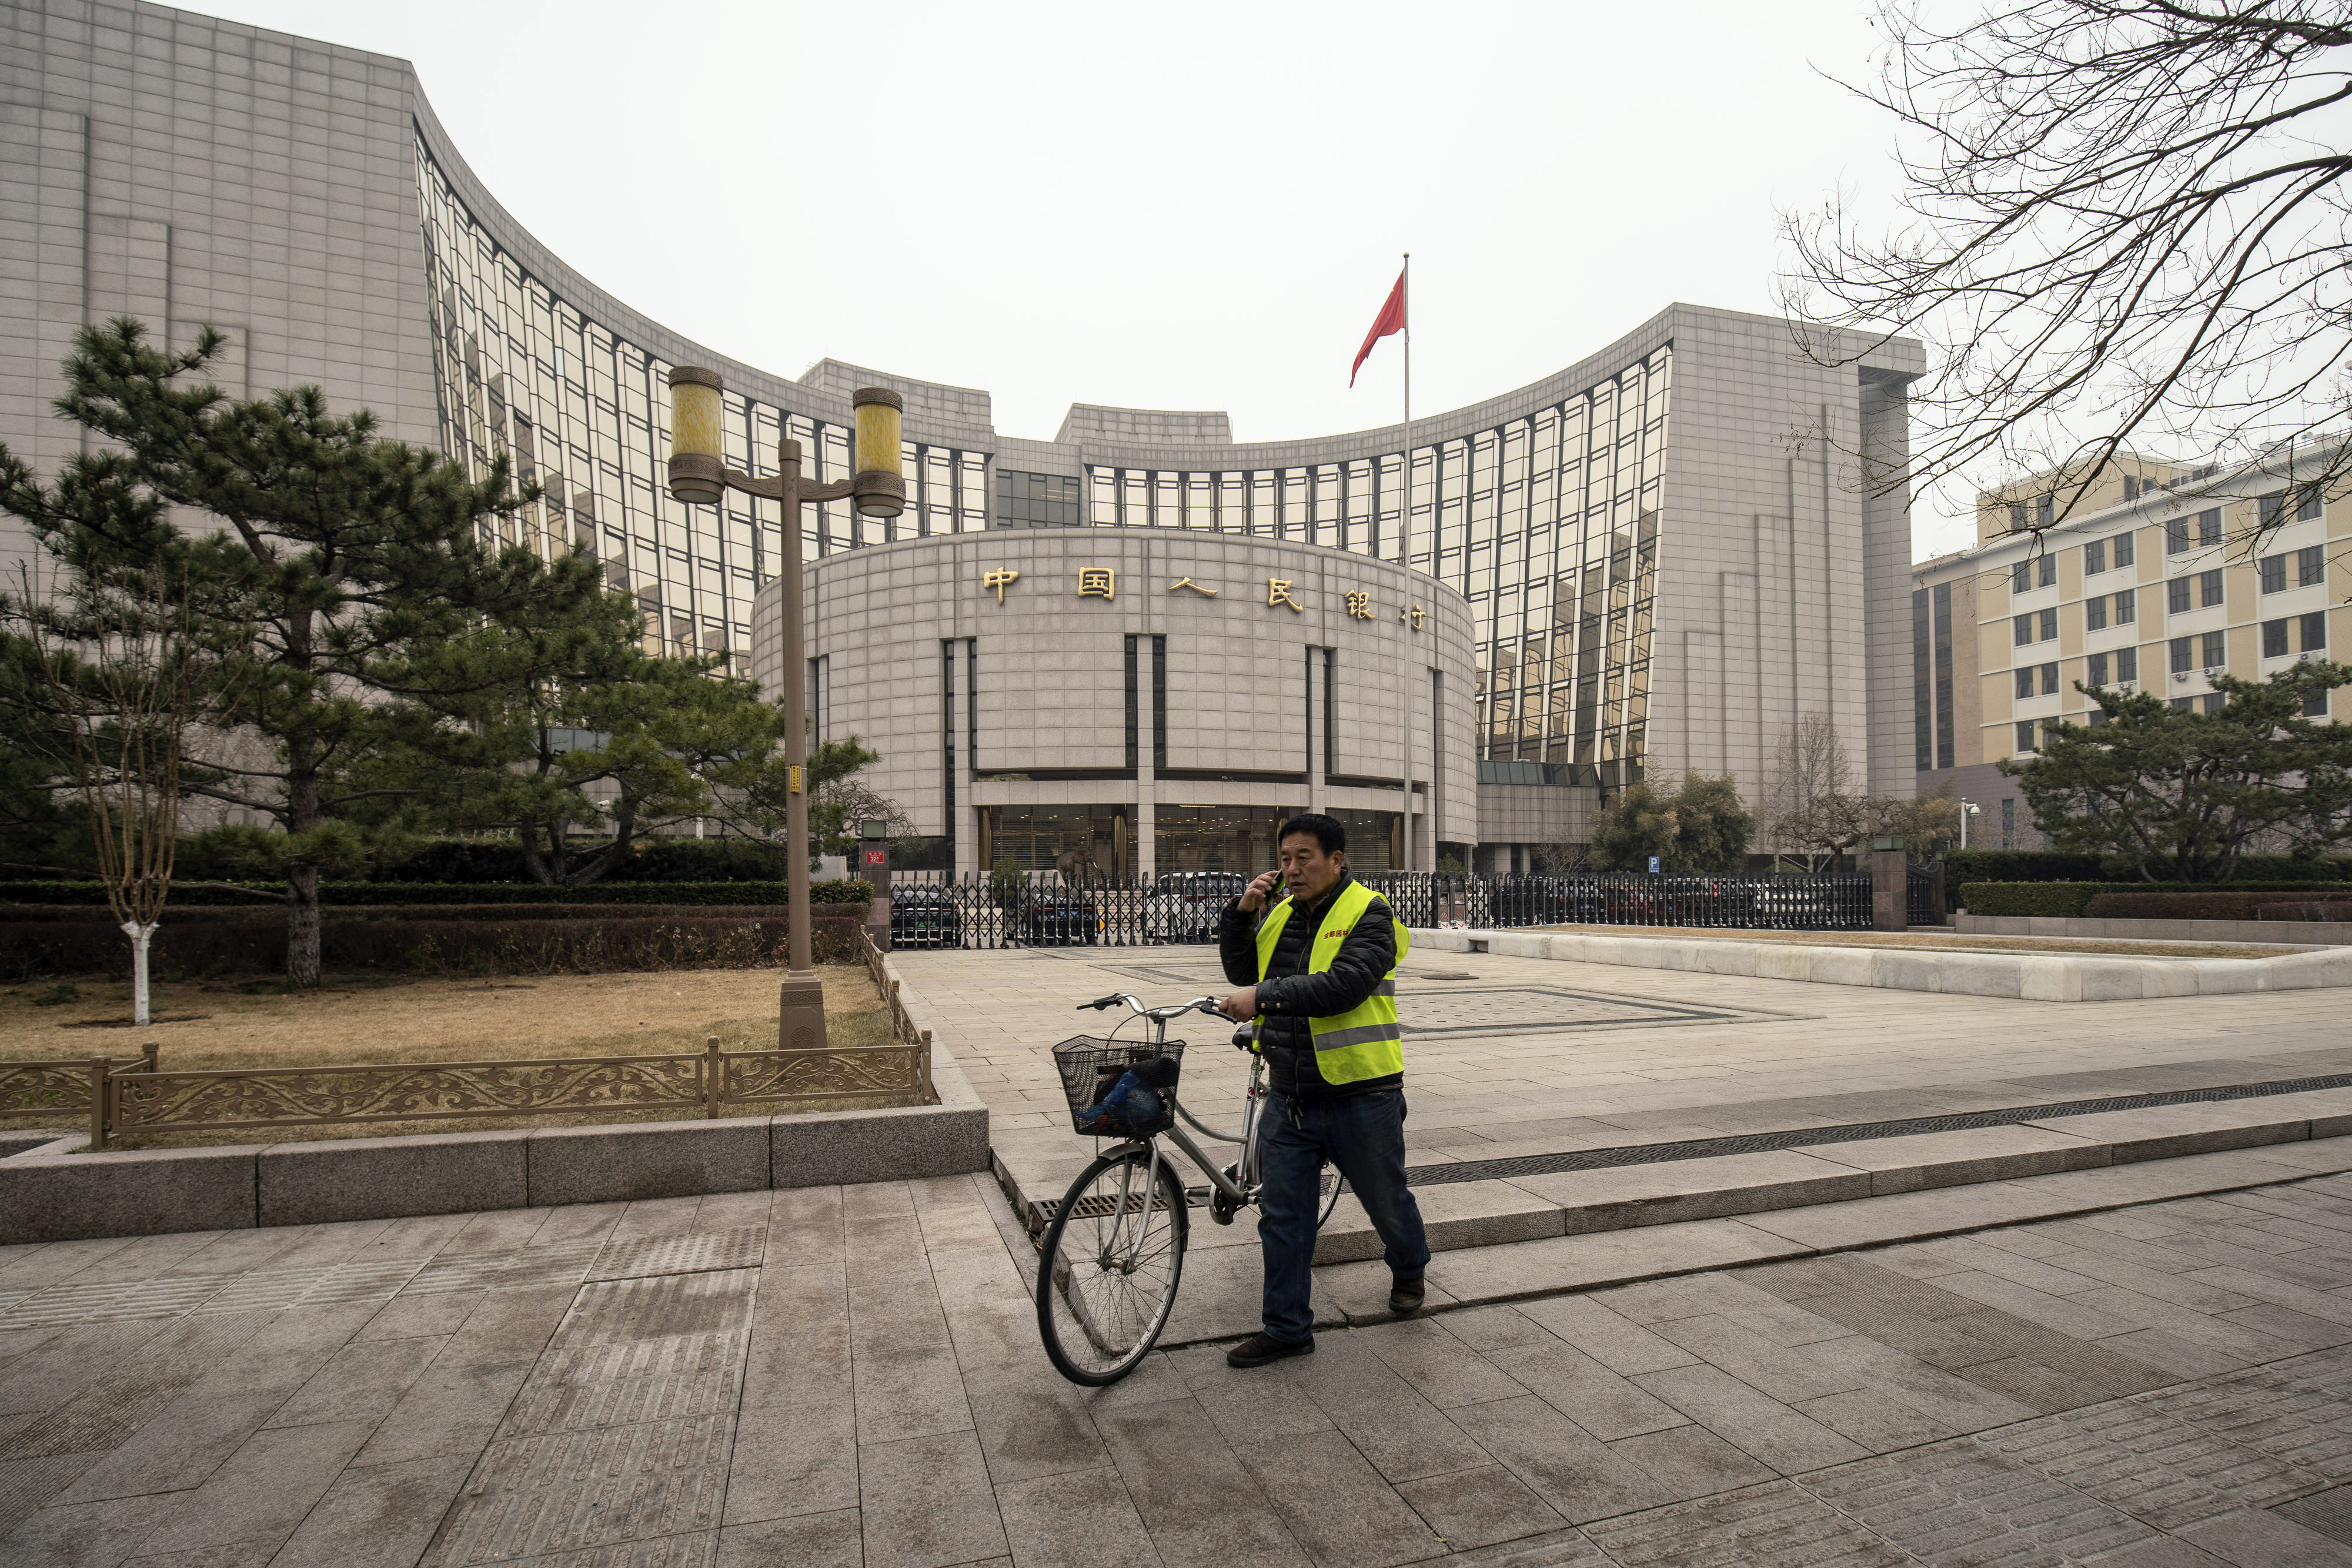 A person pushes a bike past the People’s Bank of China (PBOC) building in Beijing March 4, 2021. The bank’s reduction of reserve ratios in the first quarter of 2022 reduced costs for state-controlled banks. Photo: Bloomberg